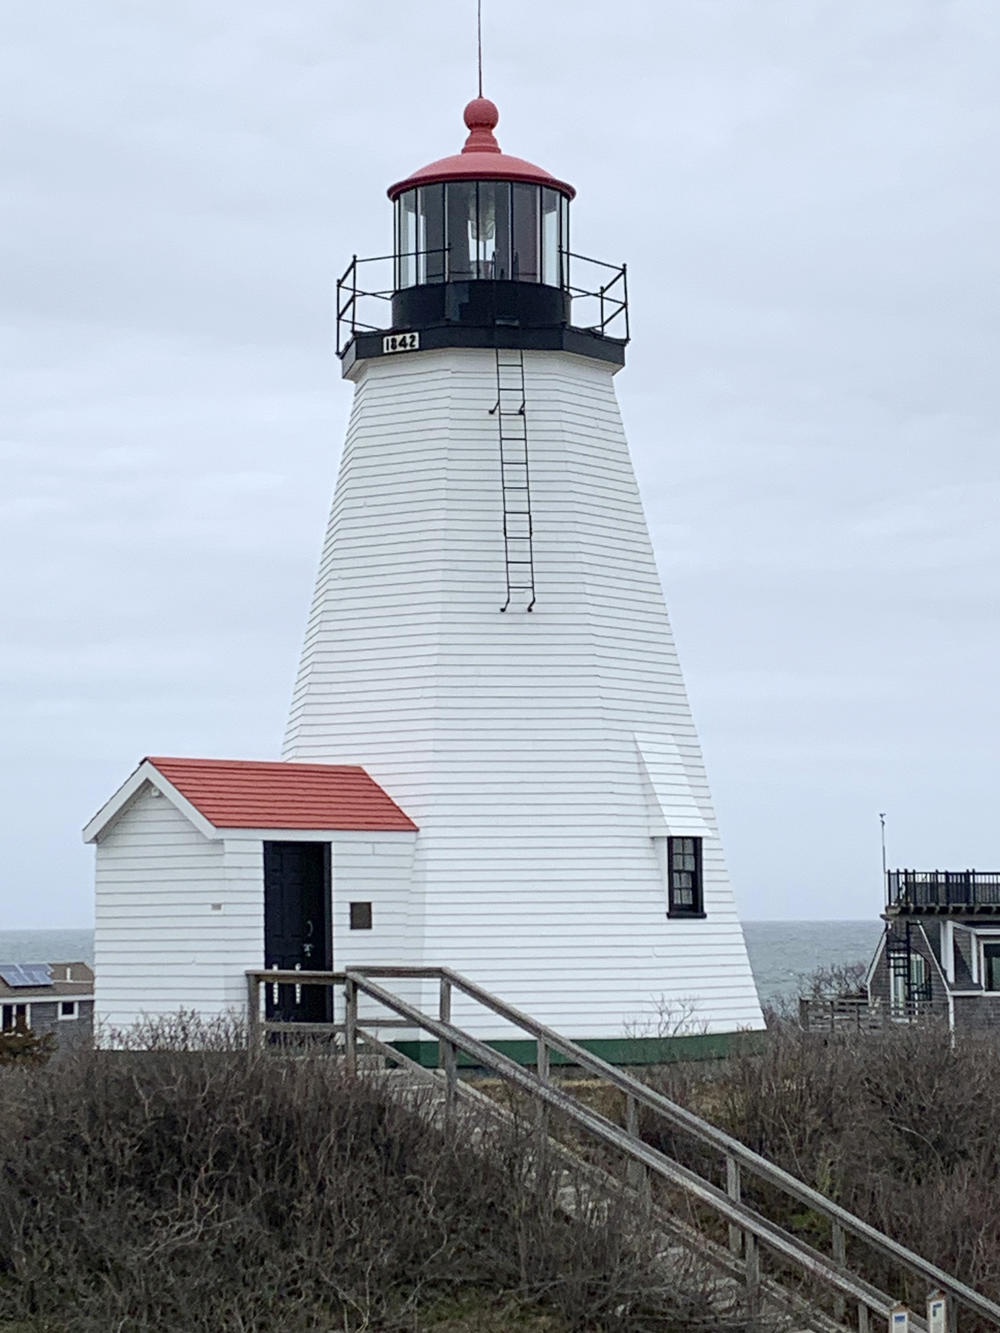 Plymouth Light Station, which dates to 1842, stands near Cape Cod Bay and Plymouth Bay, in Plymouth, Mass.